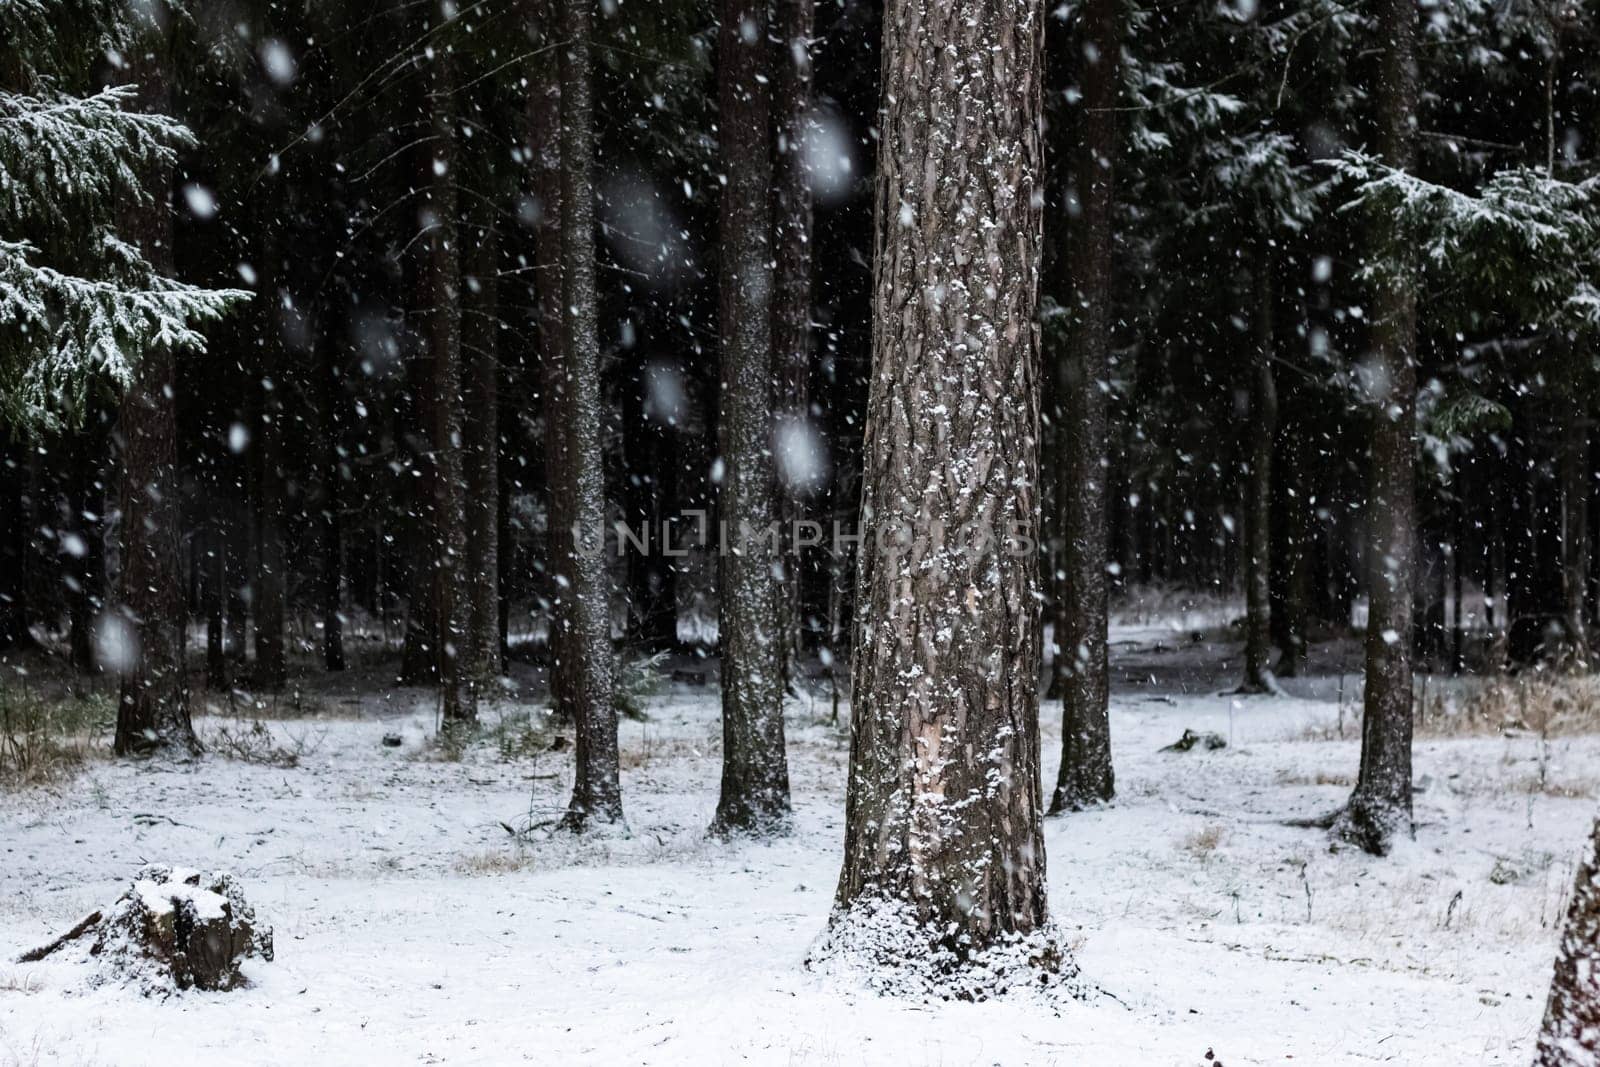 Snowy trees in a winter forest close up